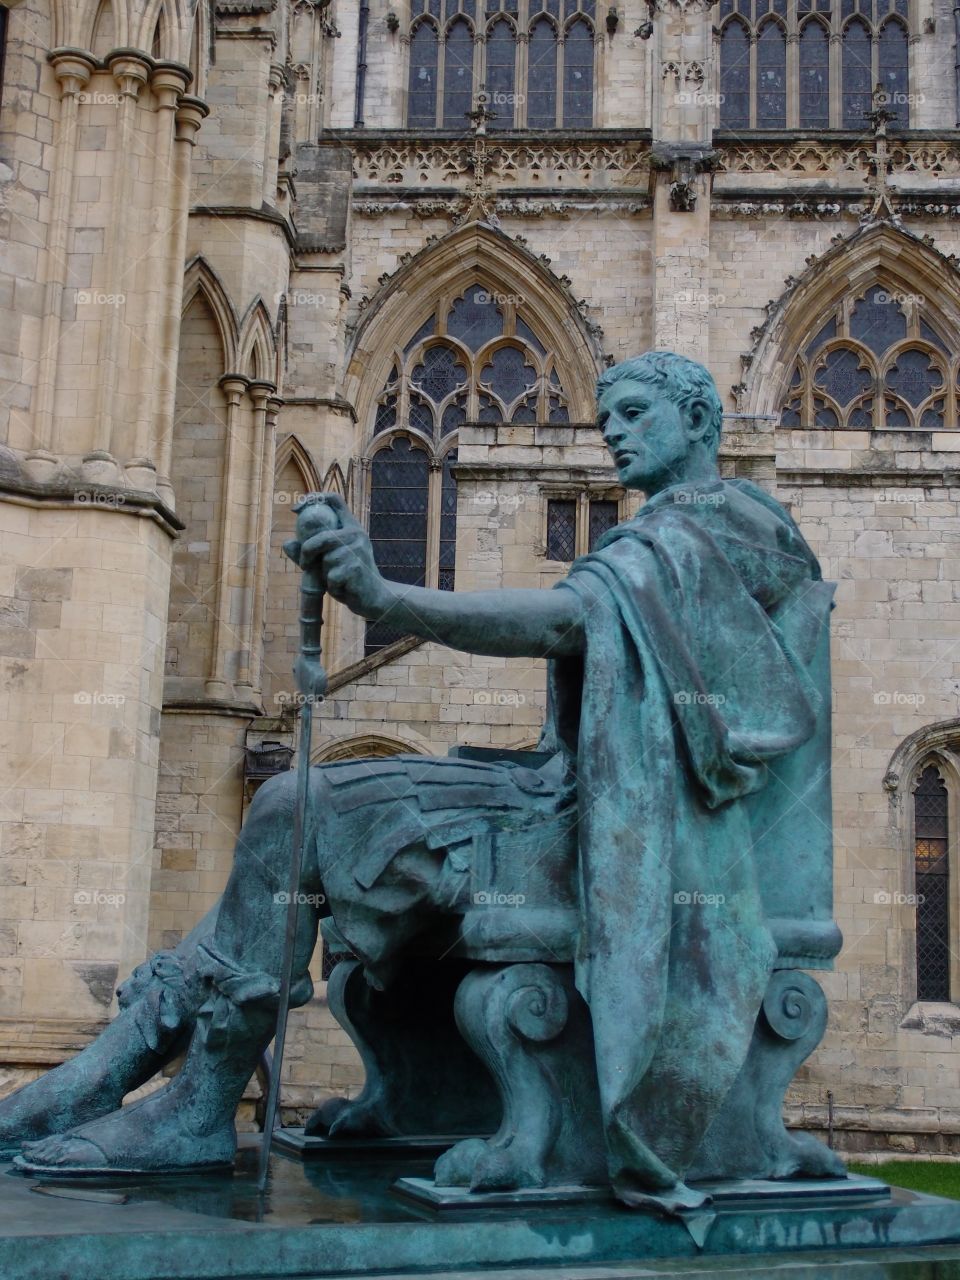 An old copper statue turned a beautiful green of a Roman figure in front of a gothic church in England. 